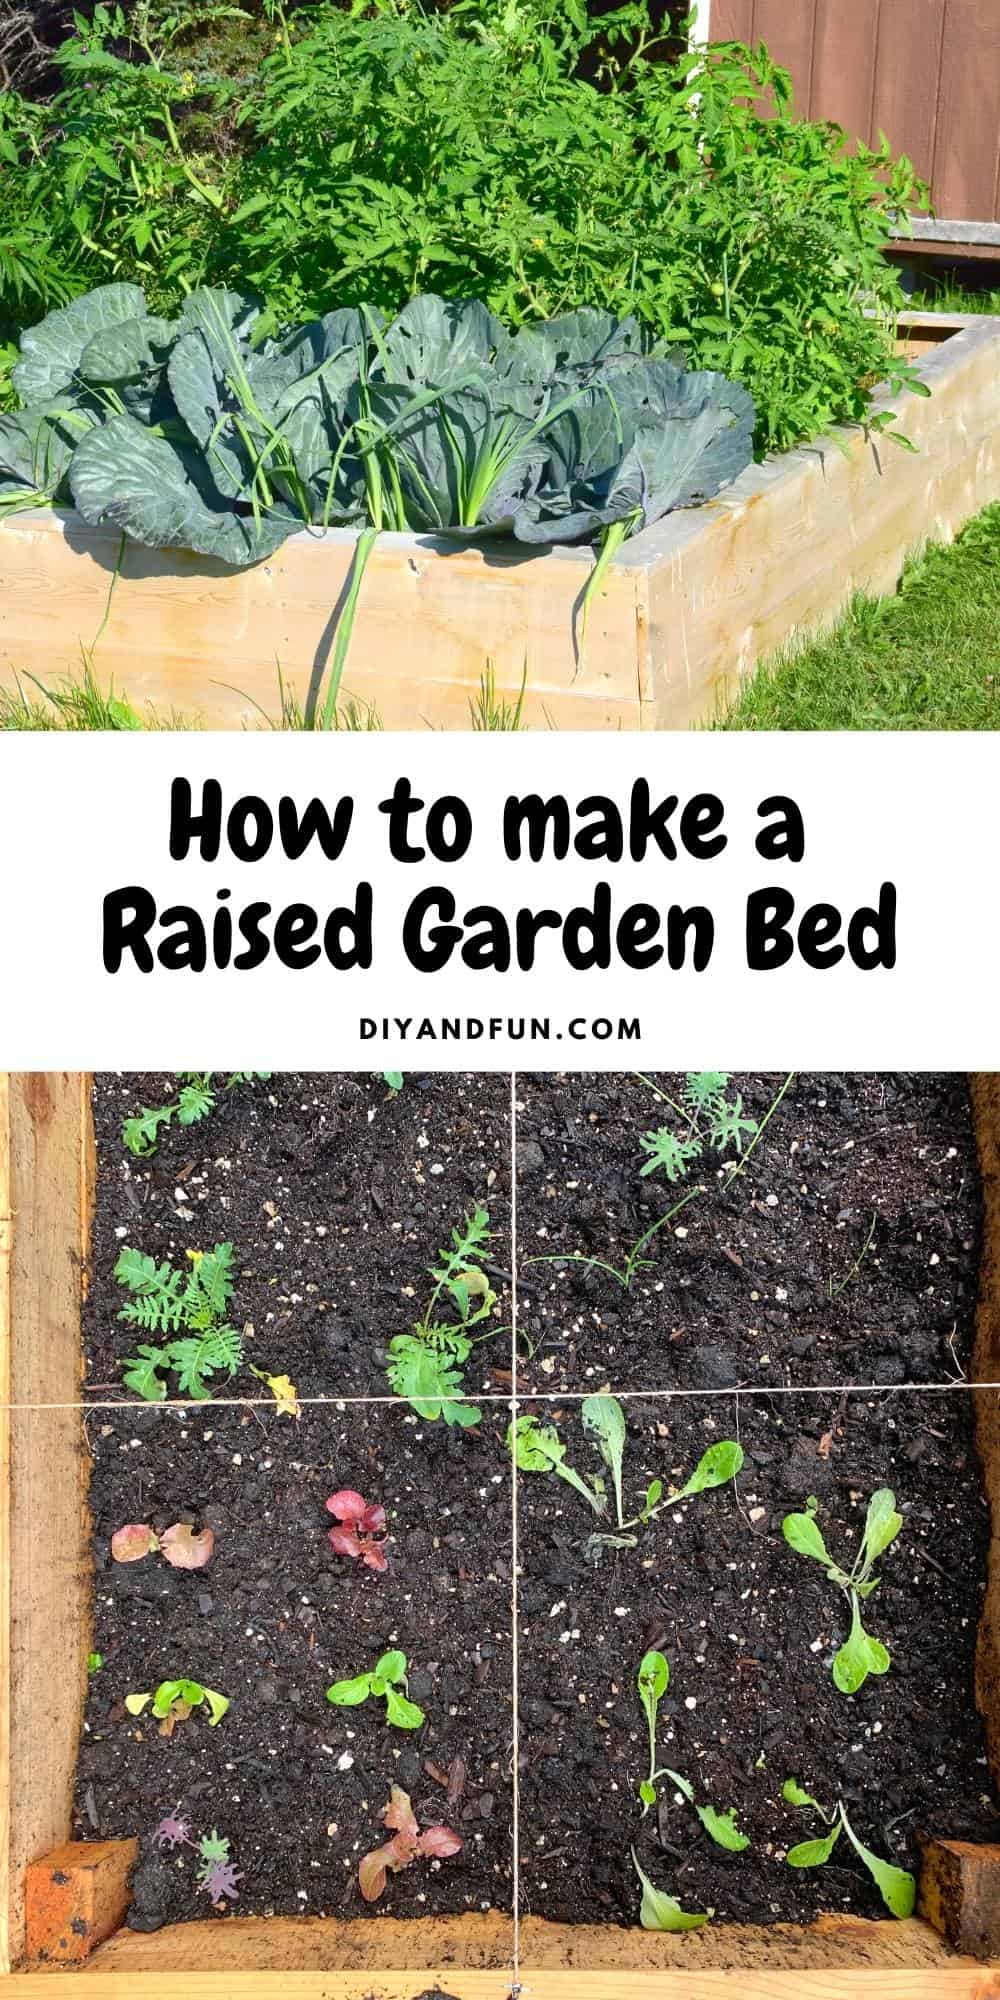 How to make a Raised Garden Bed, a beginners guide to making an inexpensive garden bed for vegetables and plants.